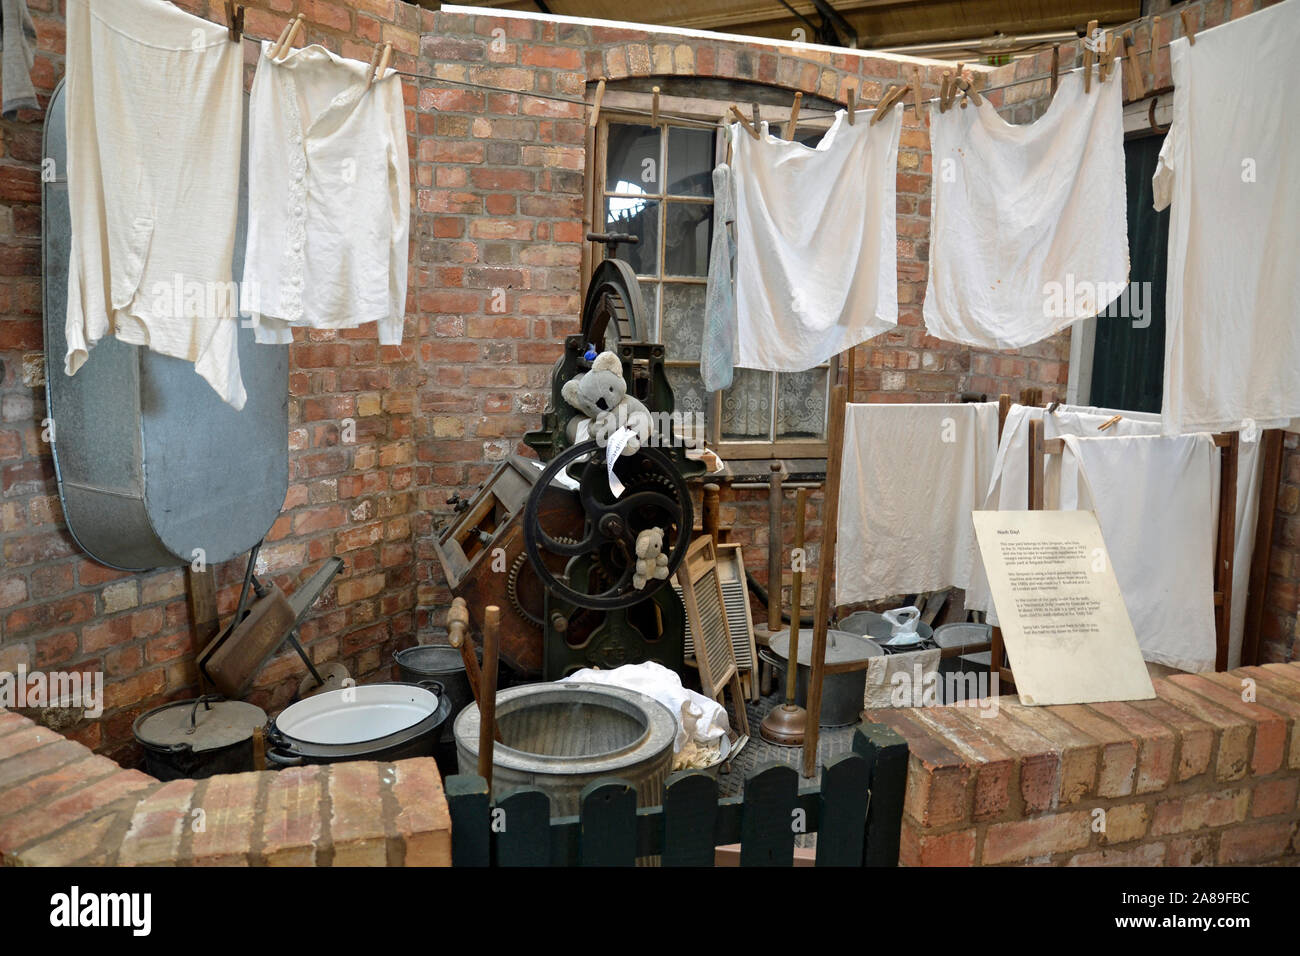 Victorian wash day display at the Abbey Pumping Station Museum, Leicester, UK. Houses exhibitions on washing, sewage, transport. Stock Photo